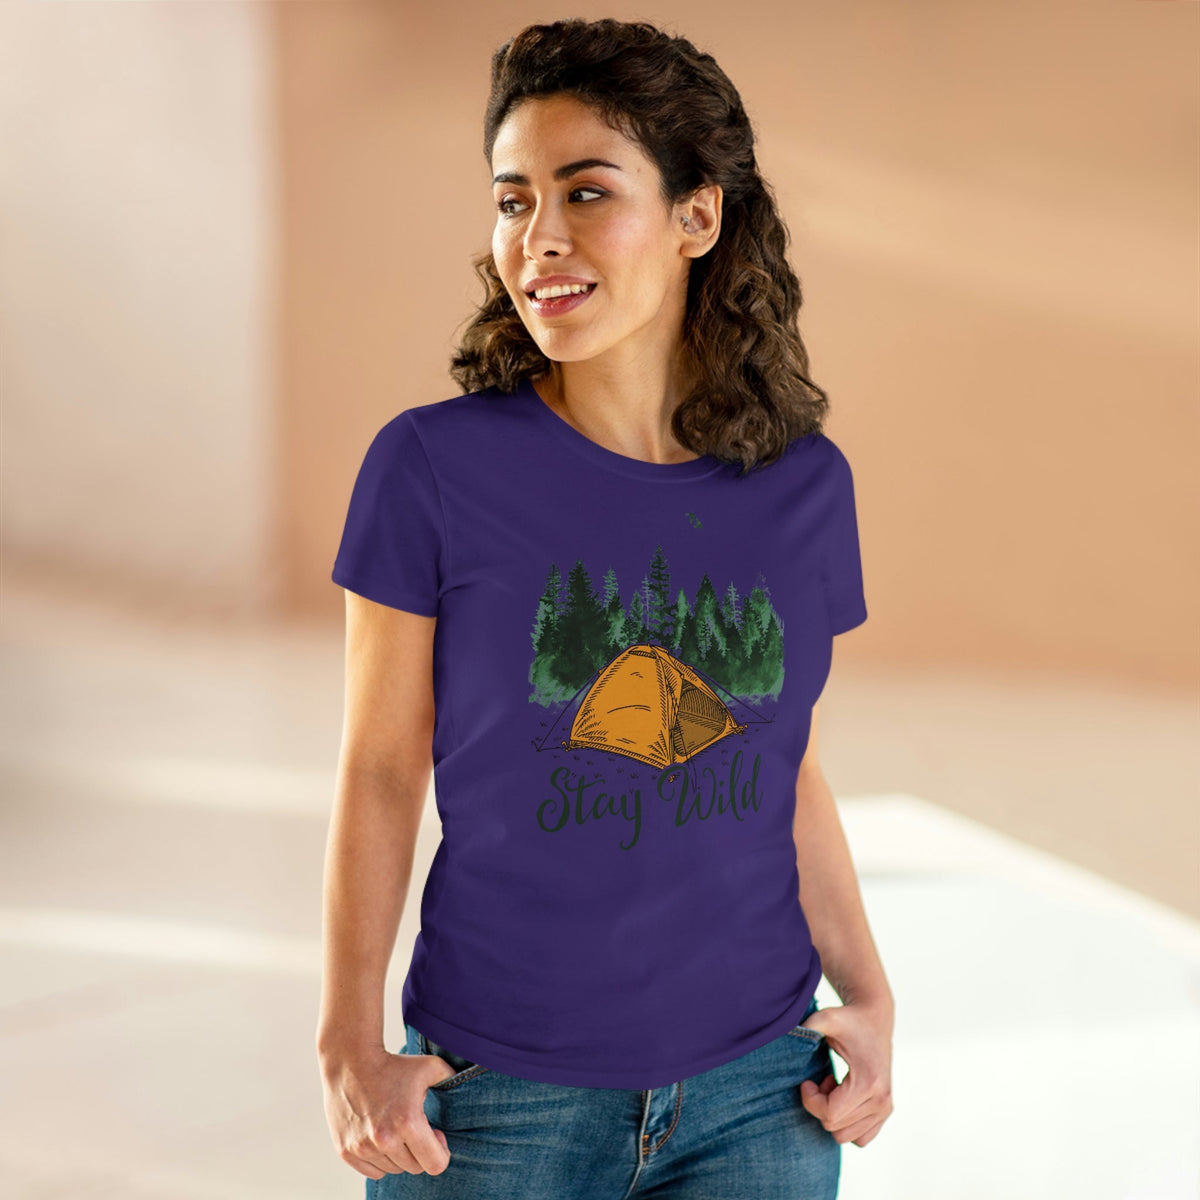 Stay Wild Outdoors Women's Midweight Cotton Tee - Salty Medic Clothing Co.